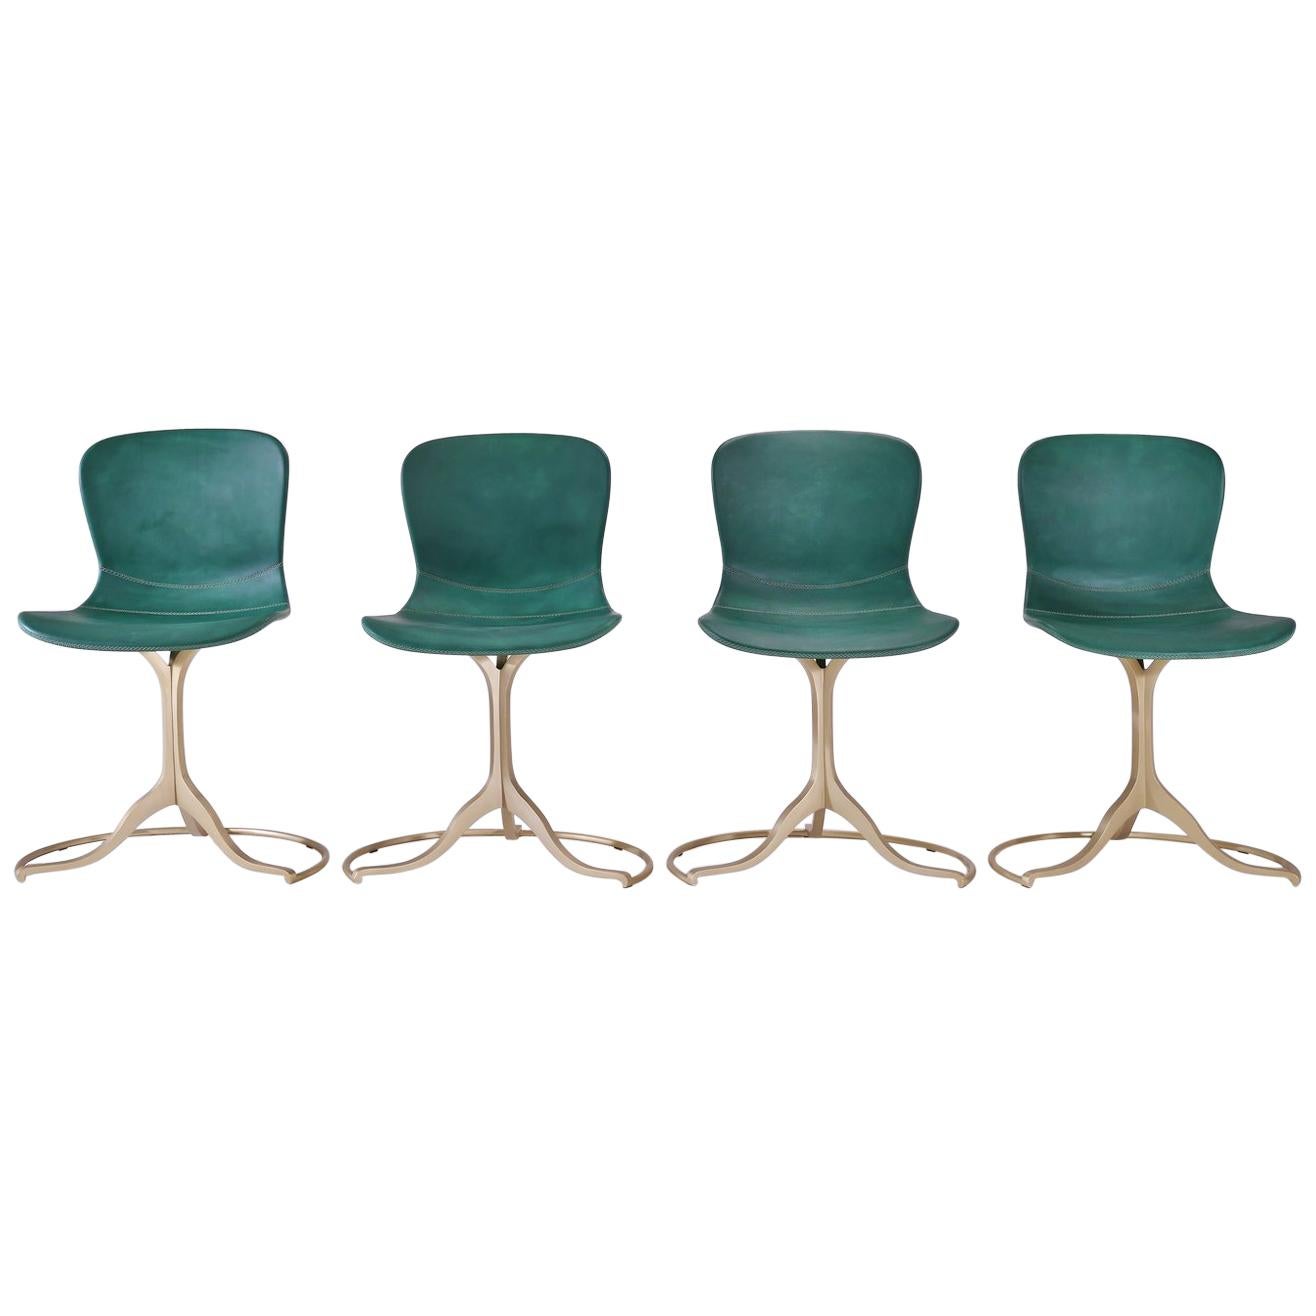 Set of 4 Bespoke Sand Cast Brass Chairs in Emeraude Leather, by P. Tendercool